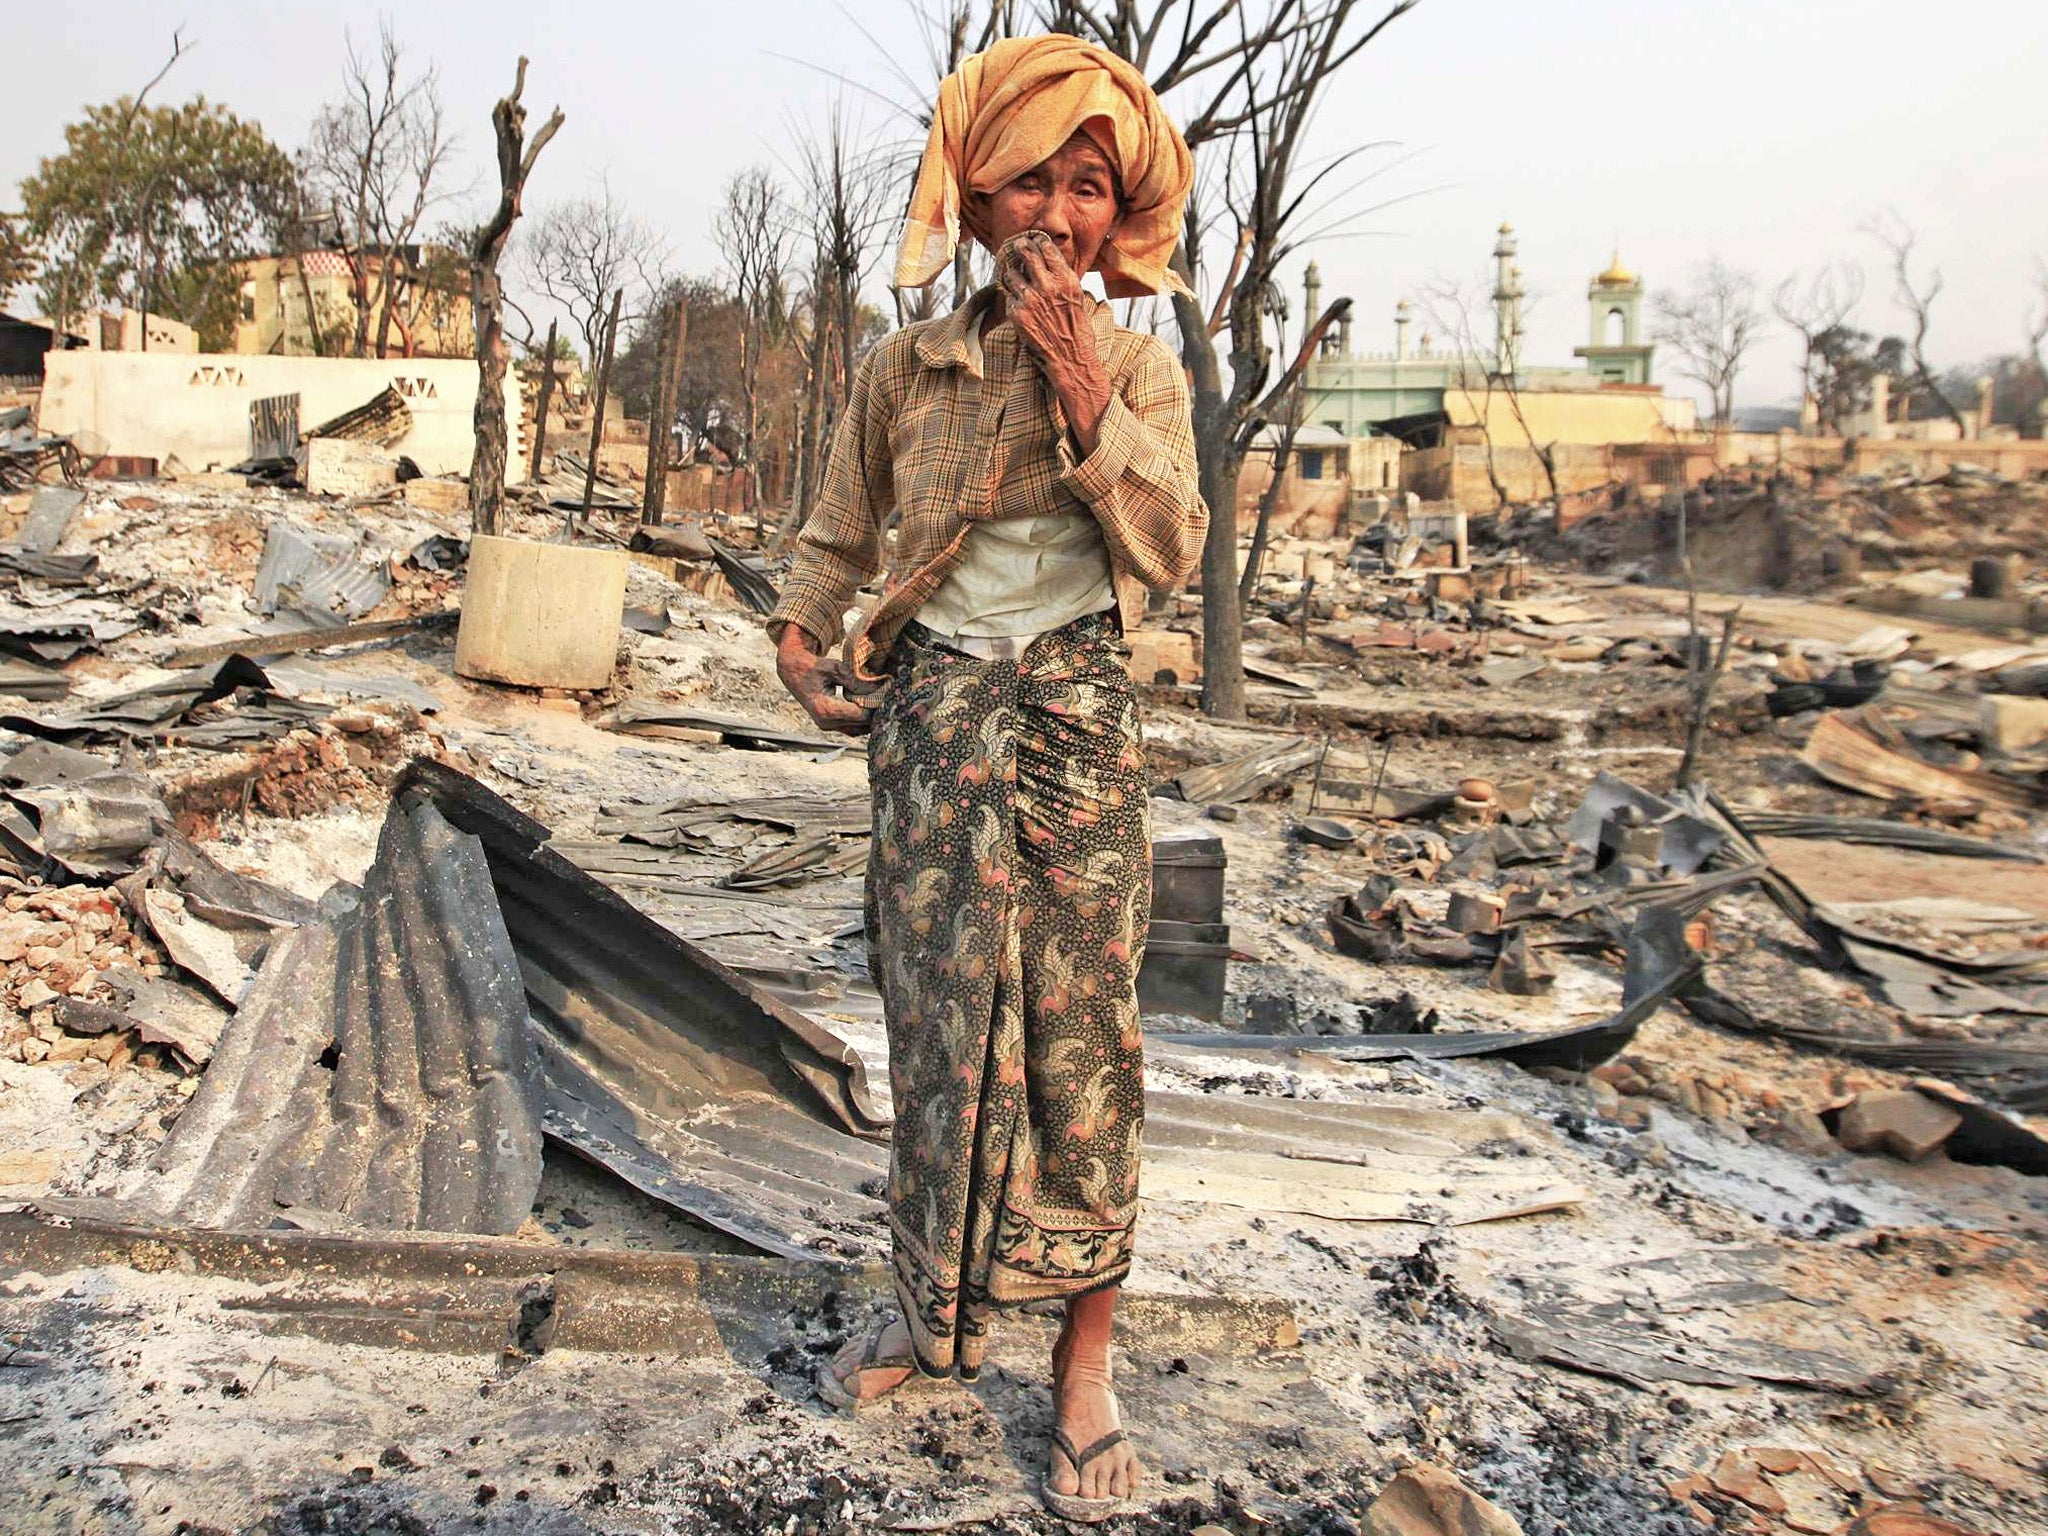 A woman cries for her home, burnt down during the riot in Meiktila in March